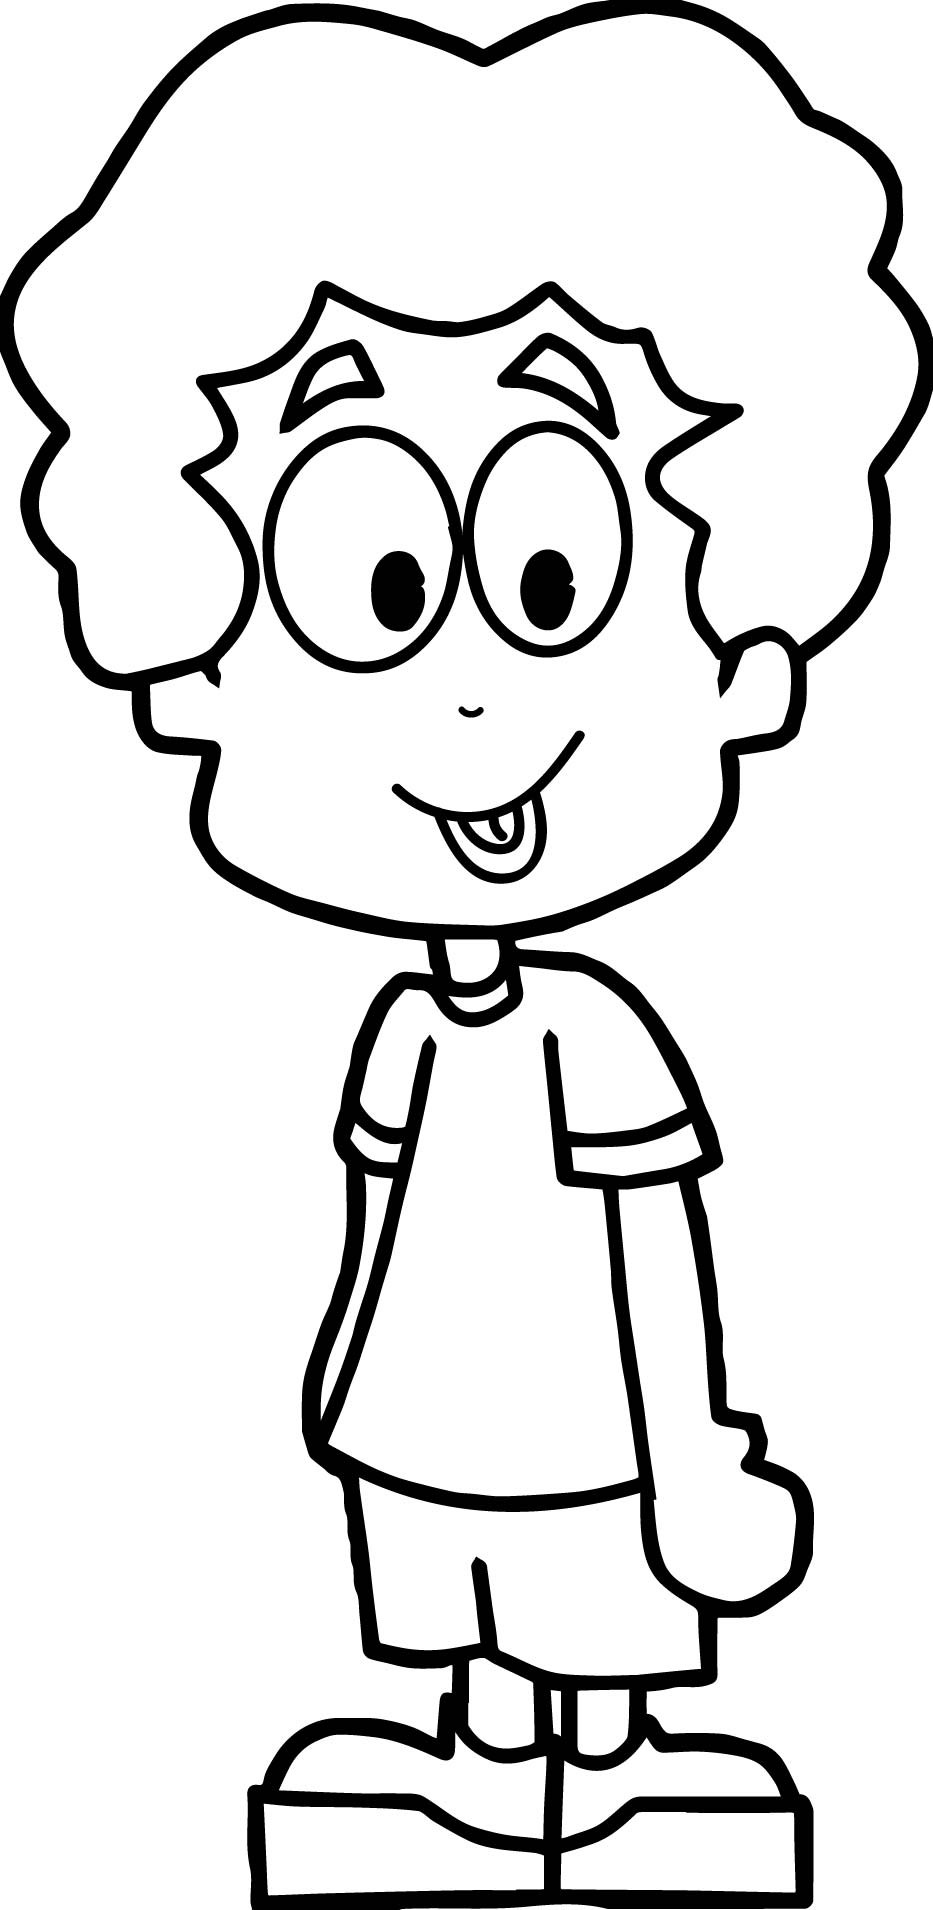 Coloring Pages Of Boys
 Cartoon Boy Coloring Page